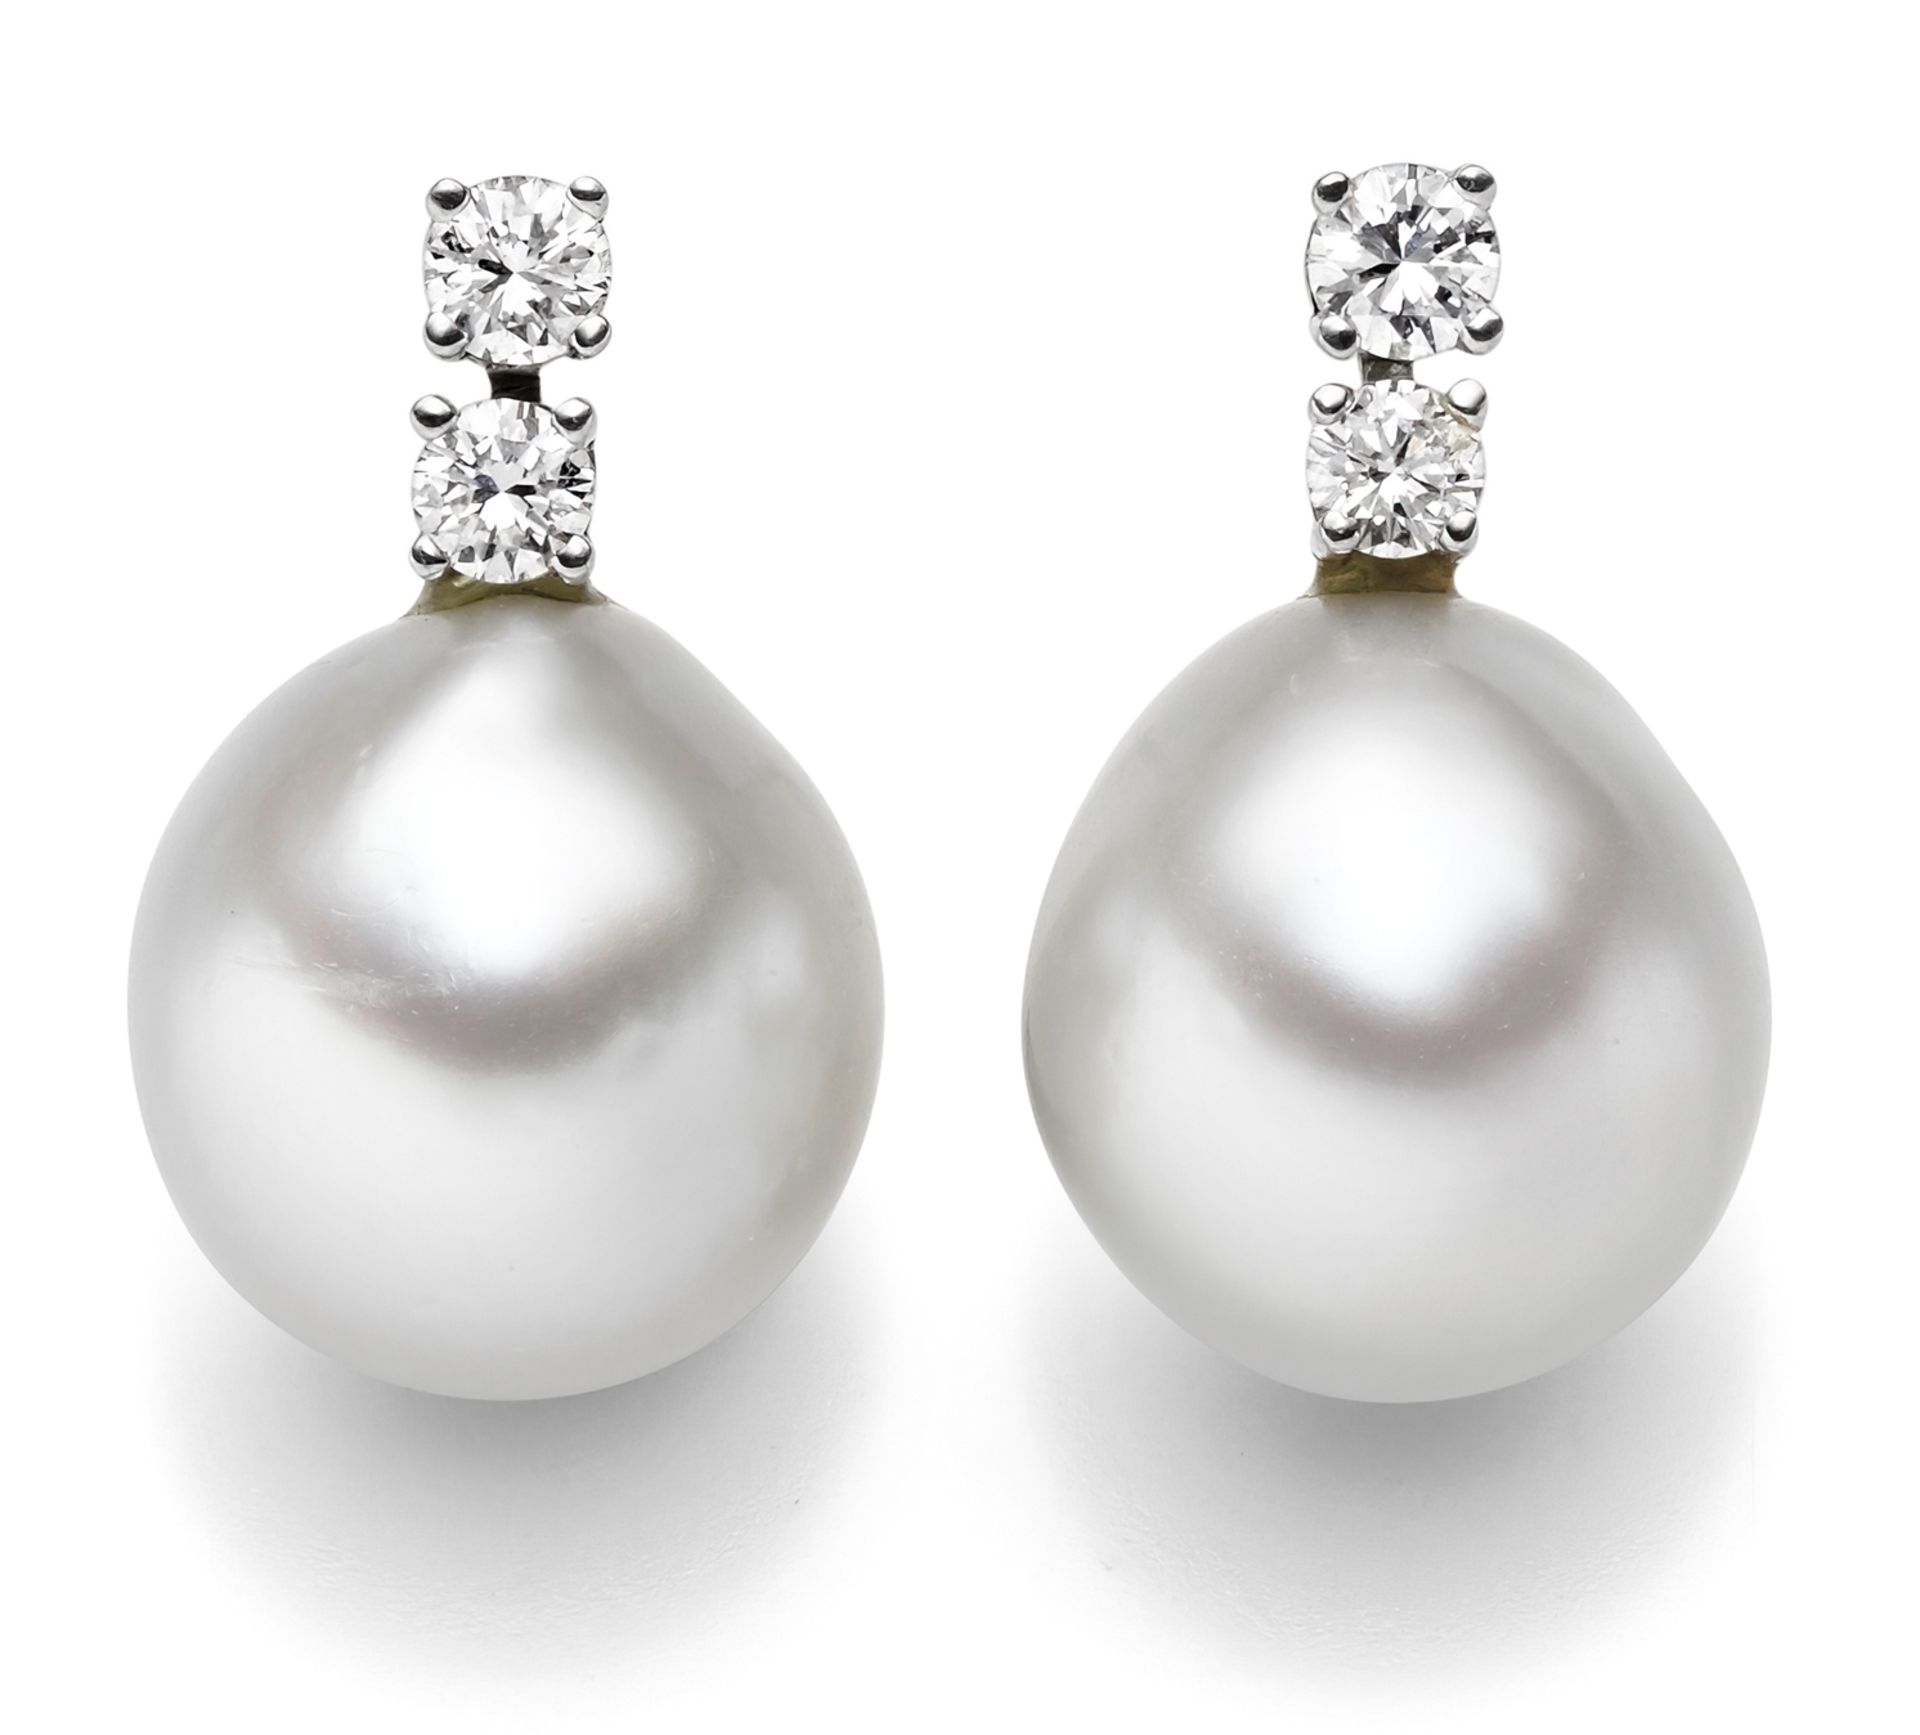 Pair of South Sea pear earrings with diamonds